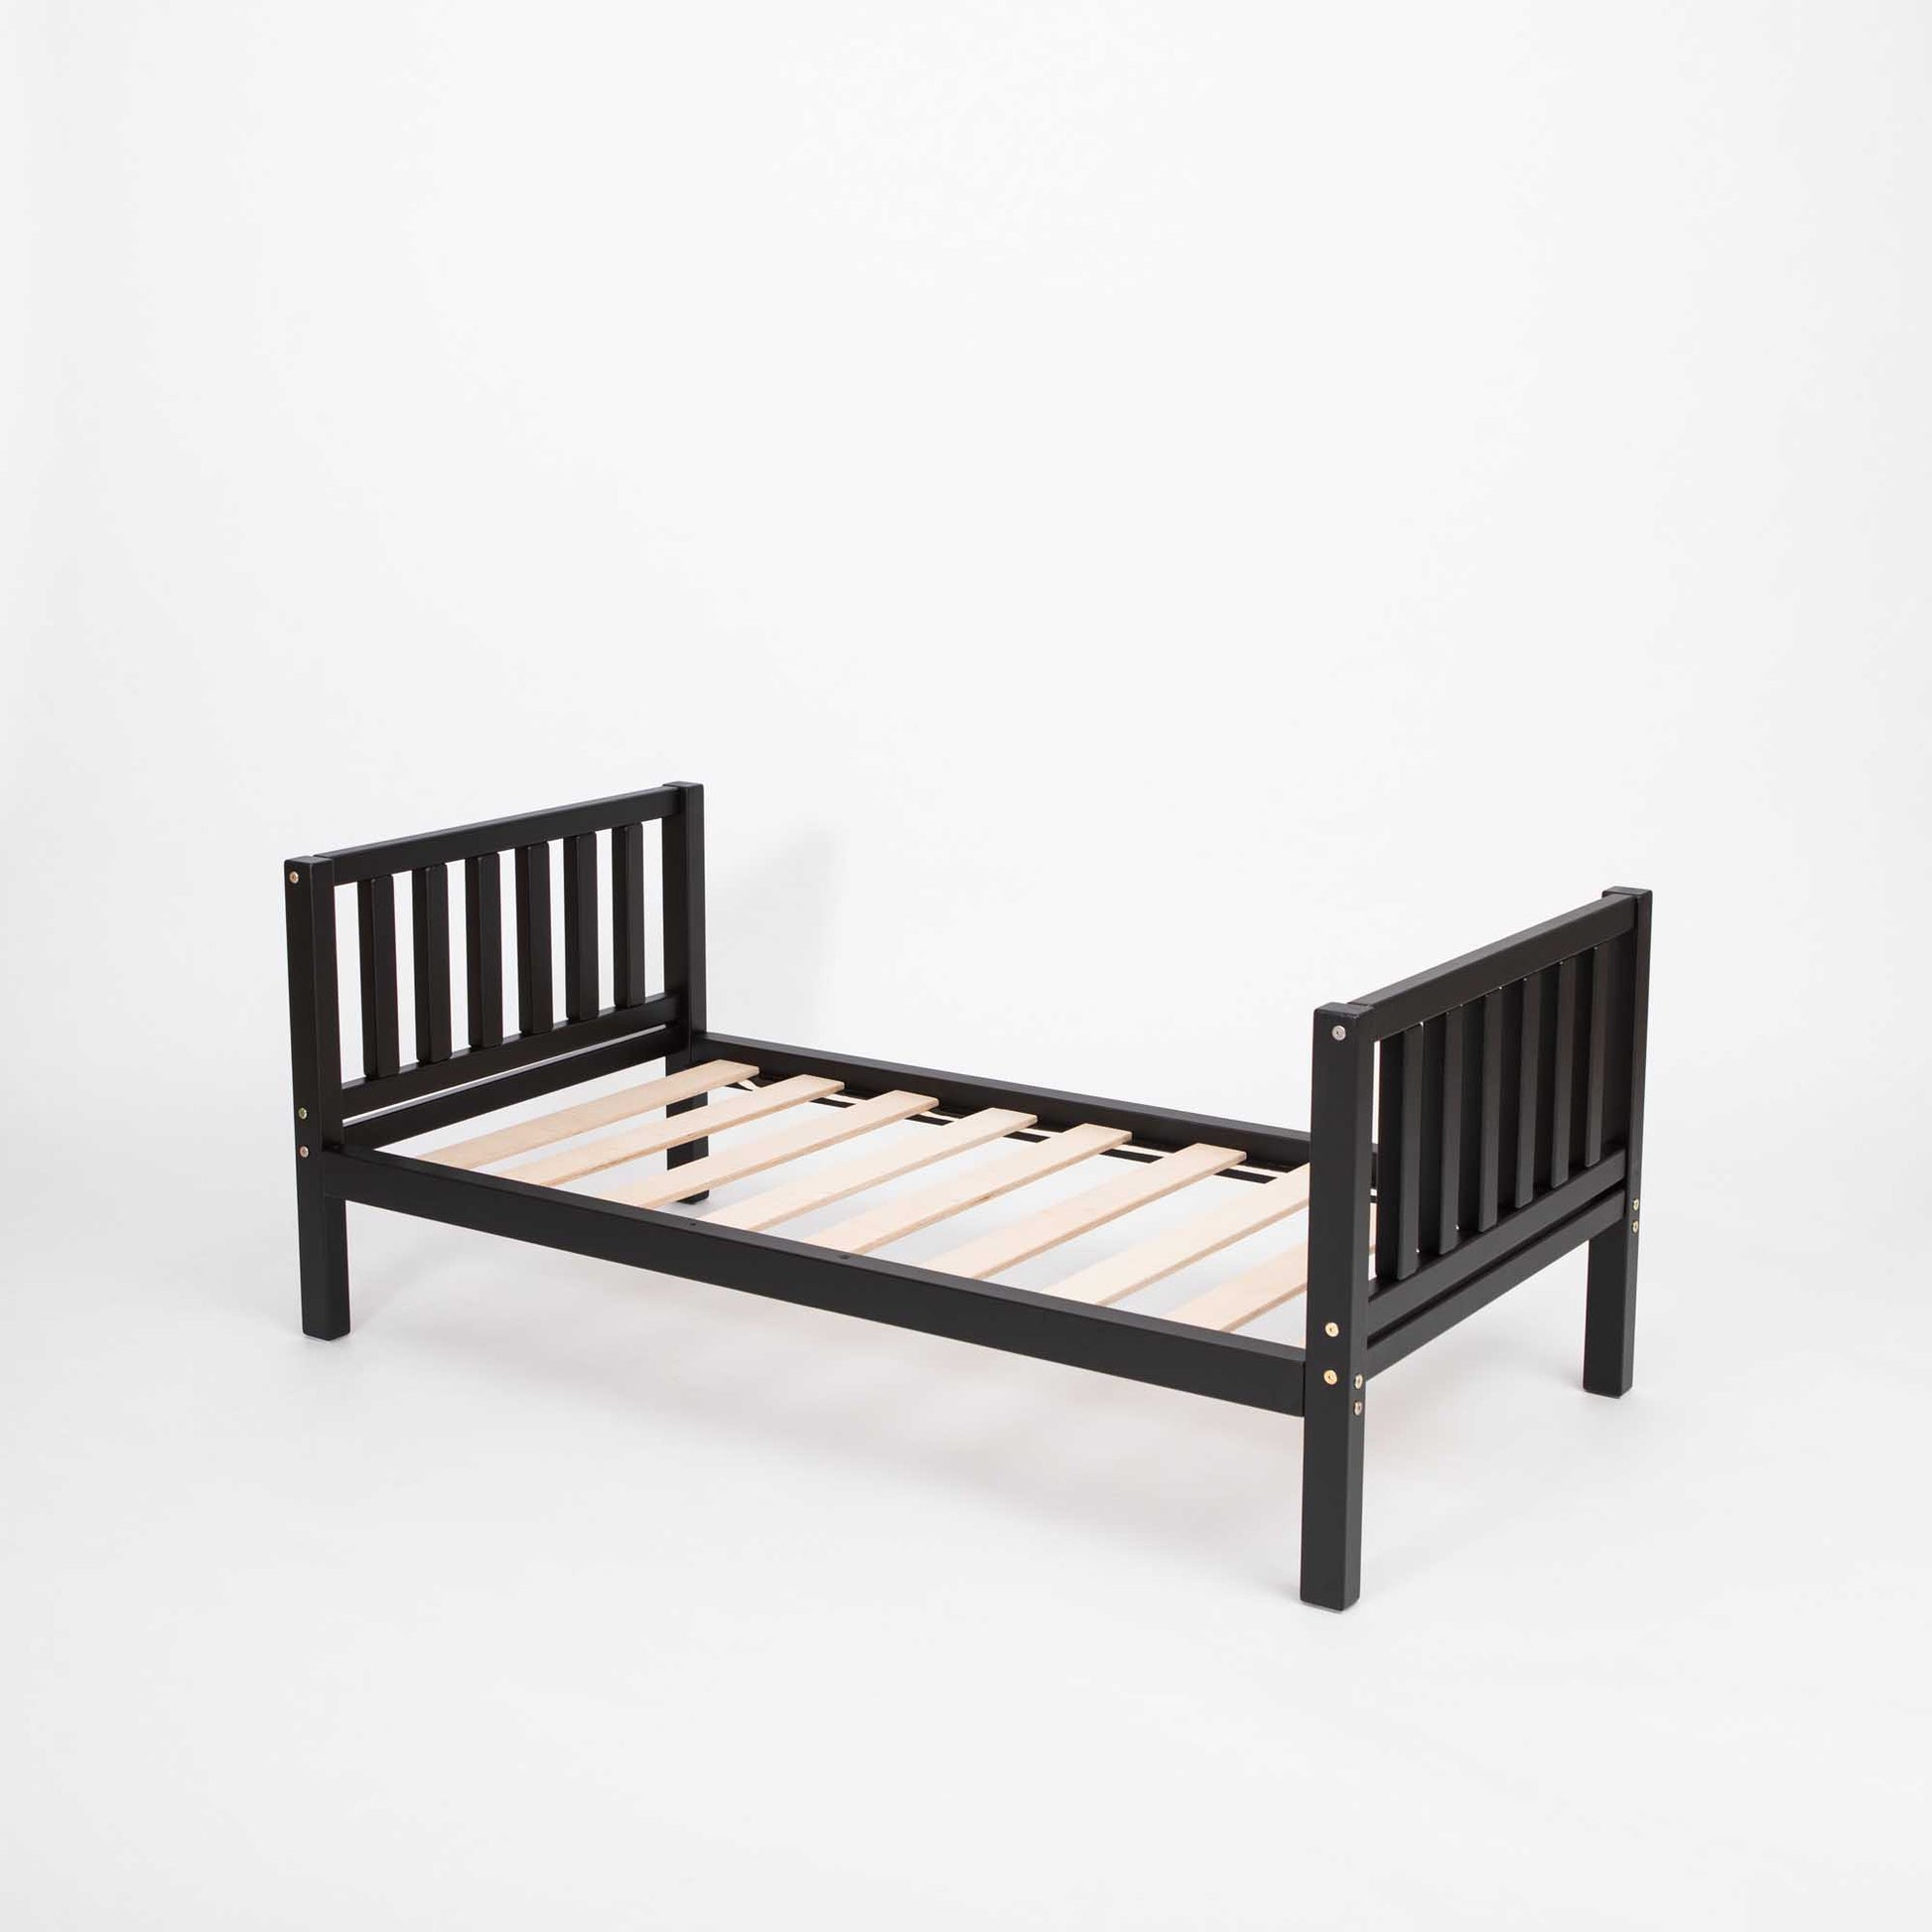 A Sweet Home From Wood Montessori-inspired black wooden toddler bed with wooden slats, promoting independence for children.